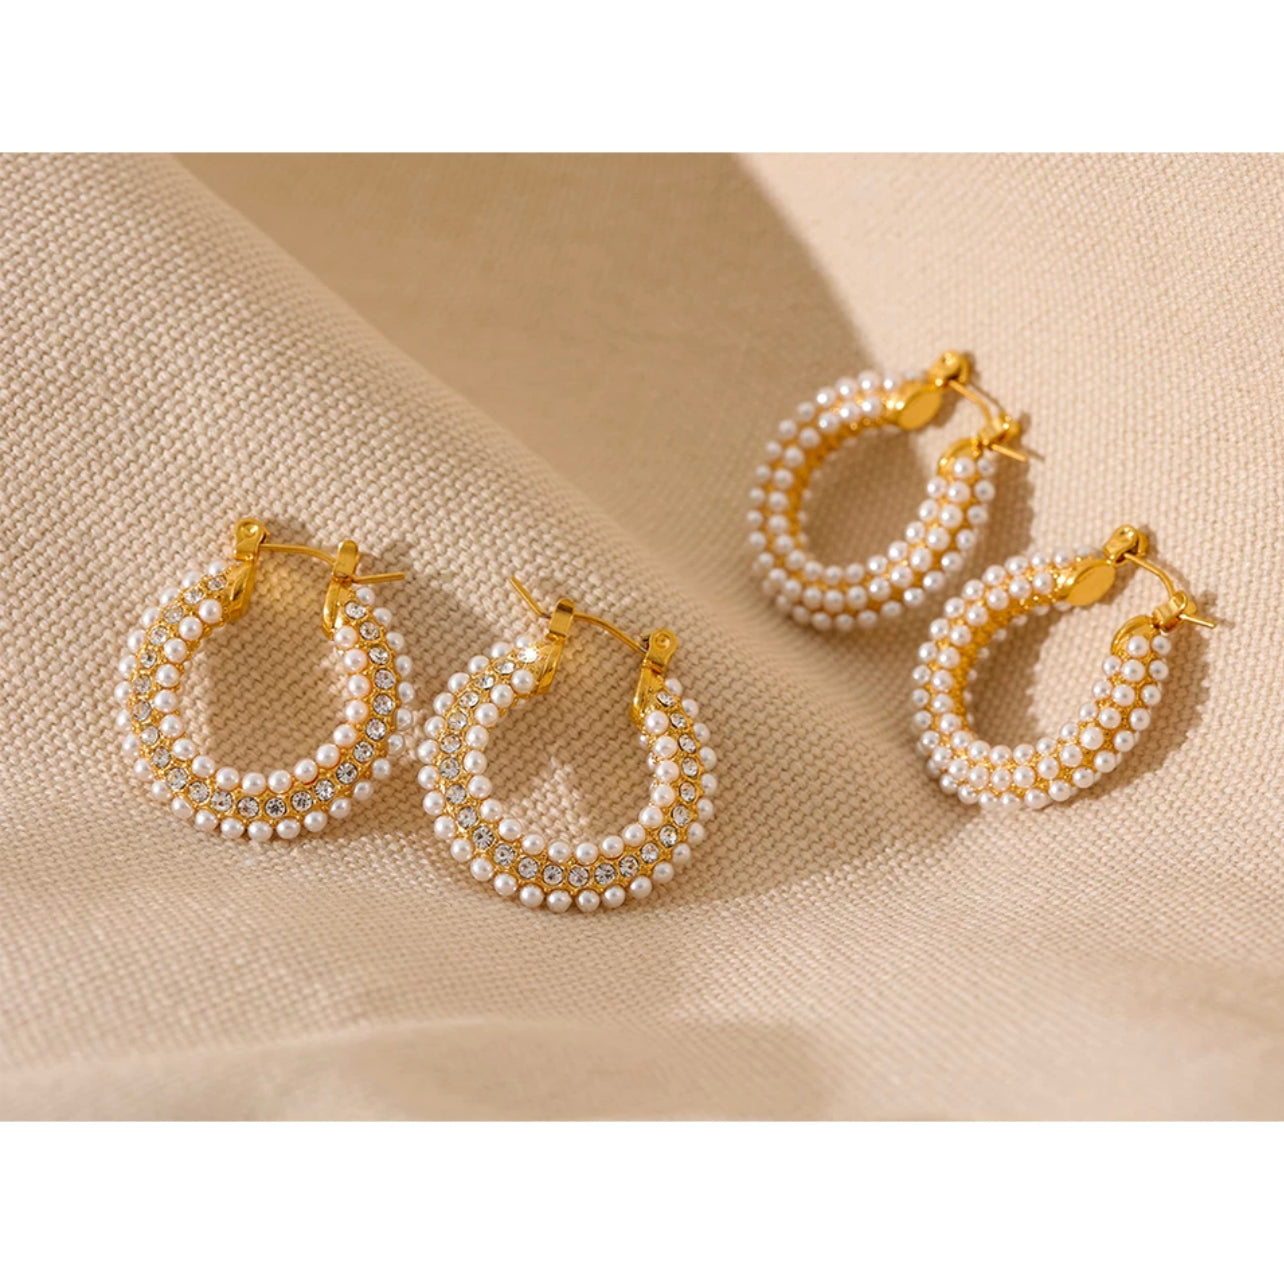 Stainless Steel Cute Pearls with CZ Embellishment Hoops Earrings